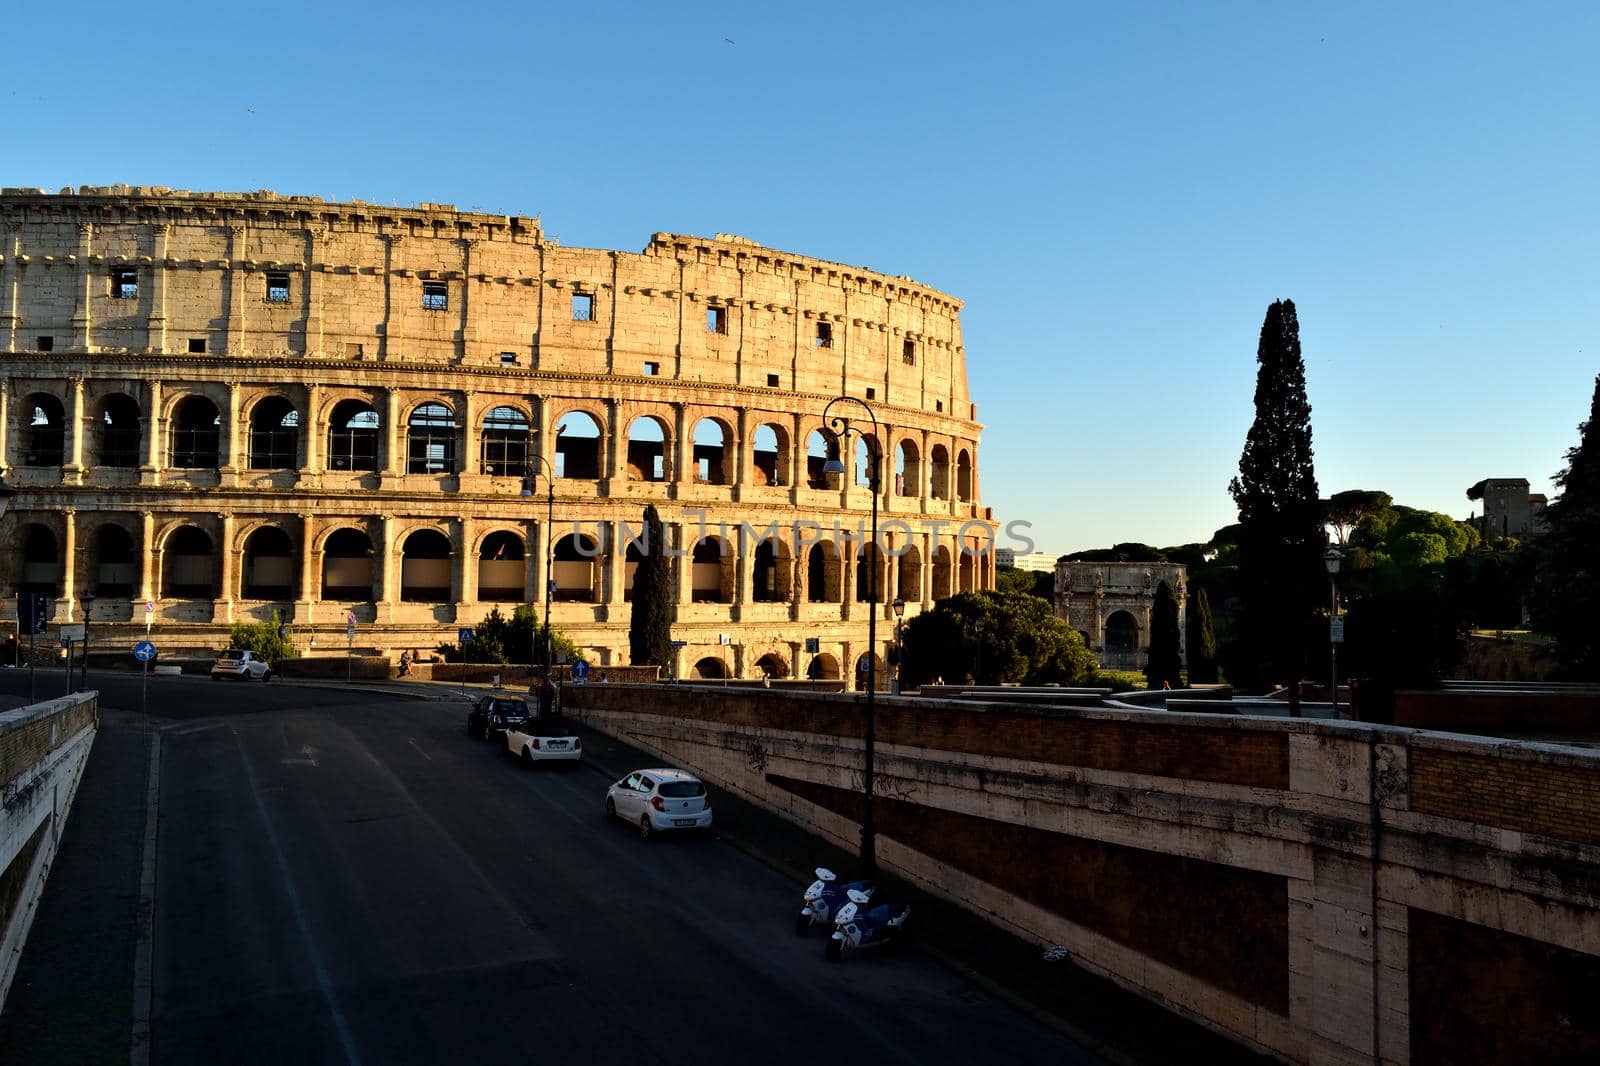 May 7th 2020, Rome, Italy: View of the Colosseum without tourists due to the phase 2 of lockdown